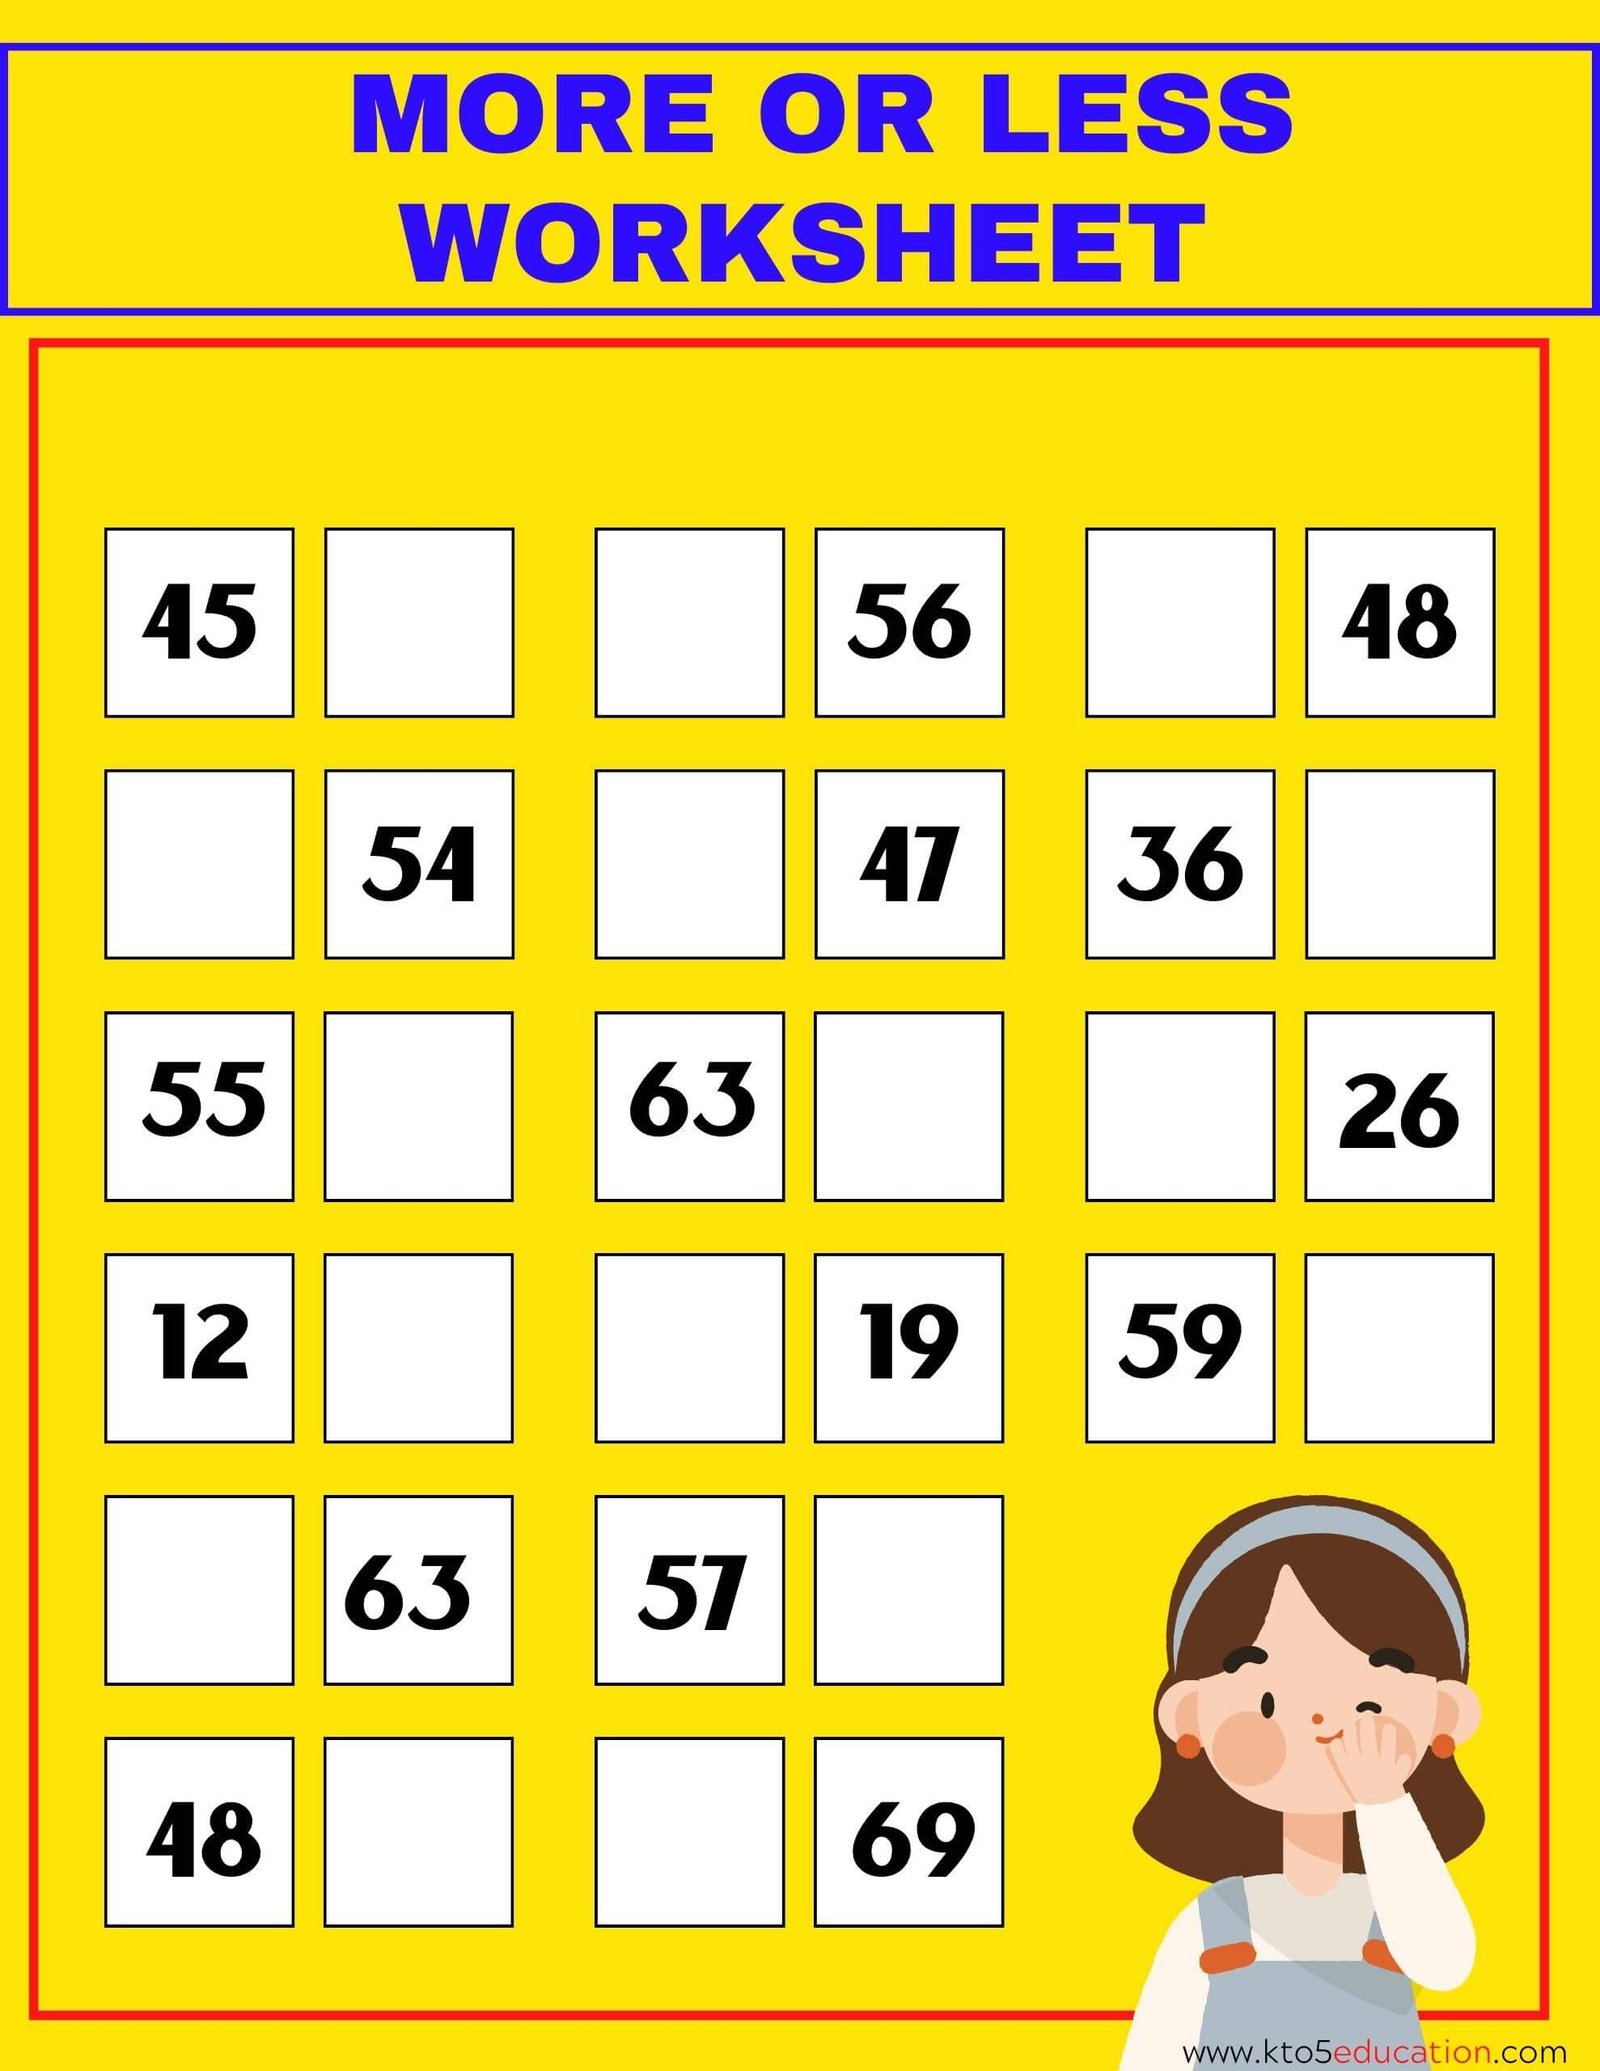 One More Less Worksheet